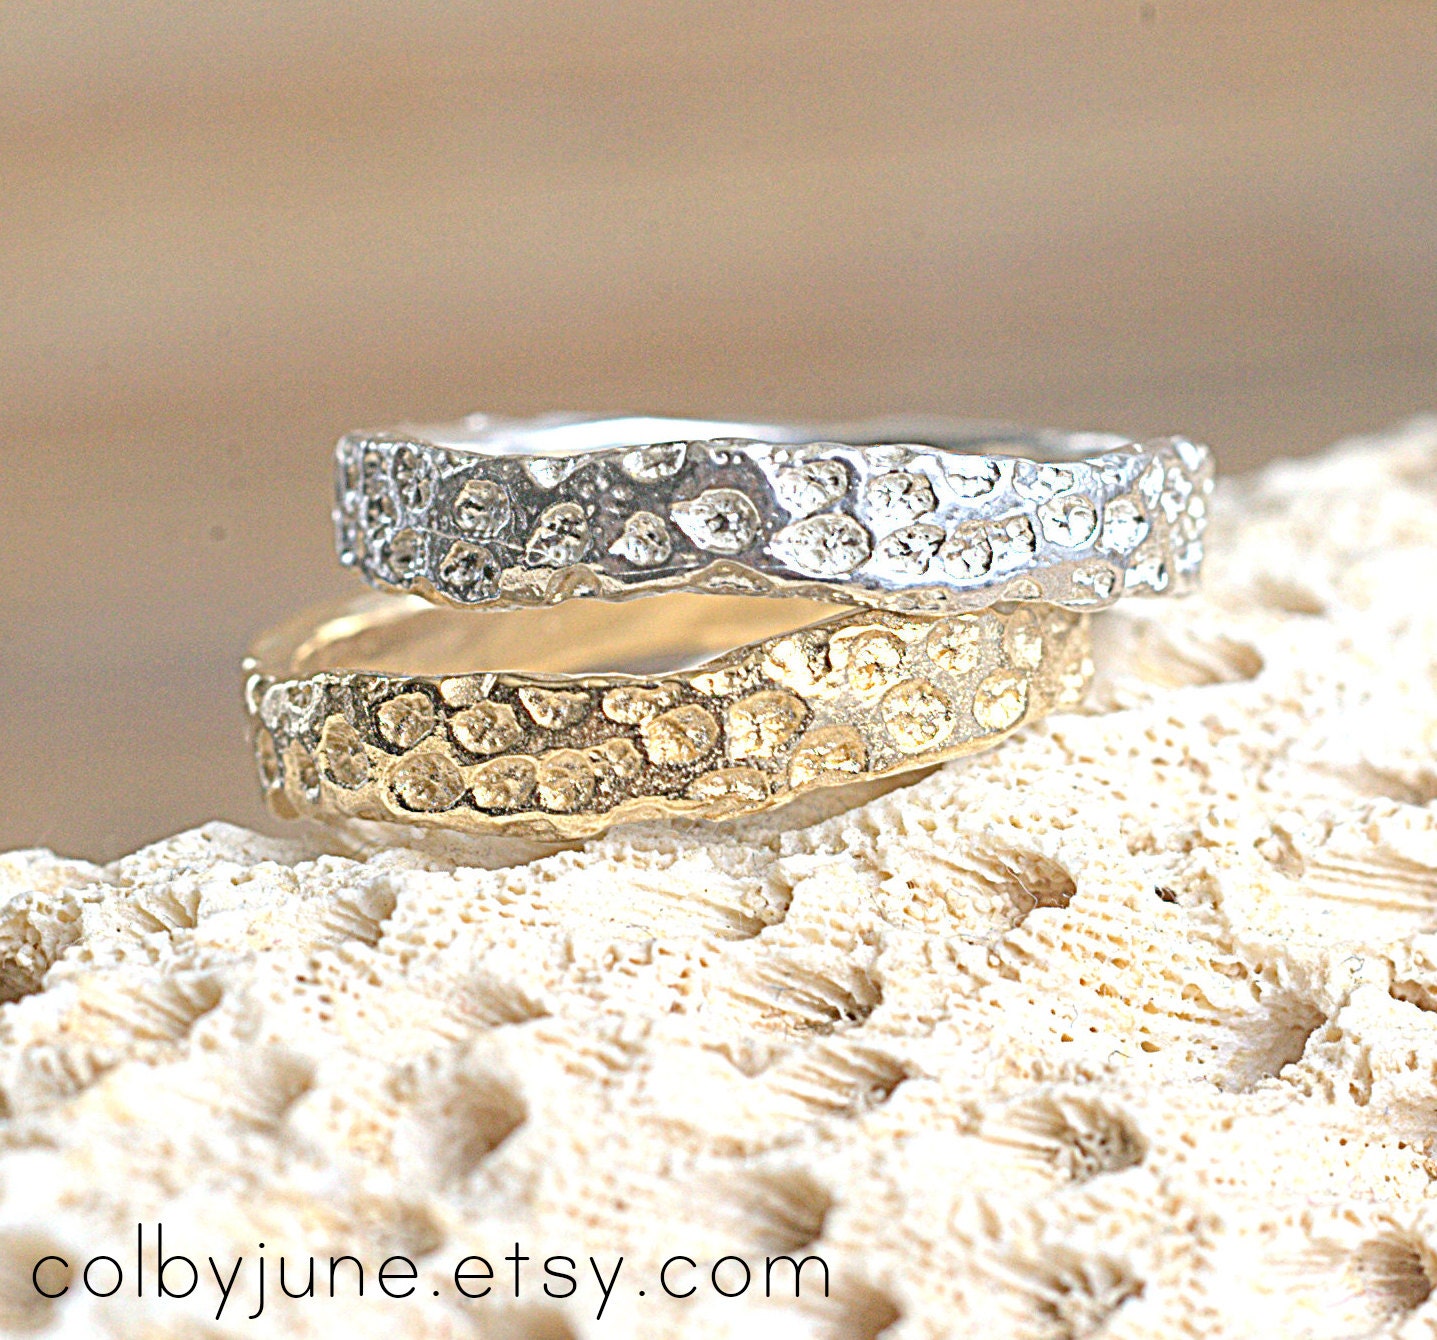 Gold Vermeil Coral Ring| Rings| Contemporary Ring Designs - ColbyJuneJewelry